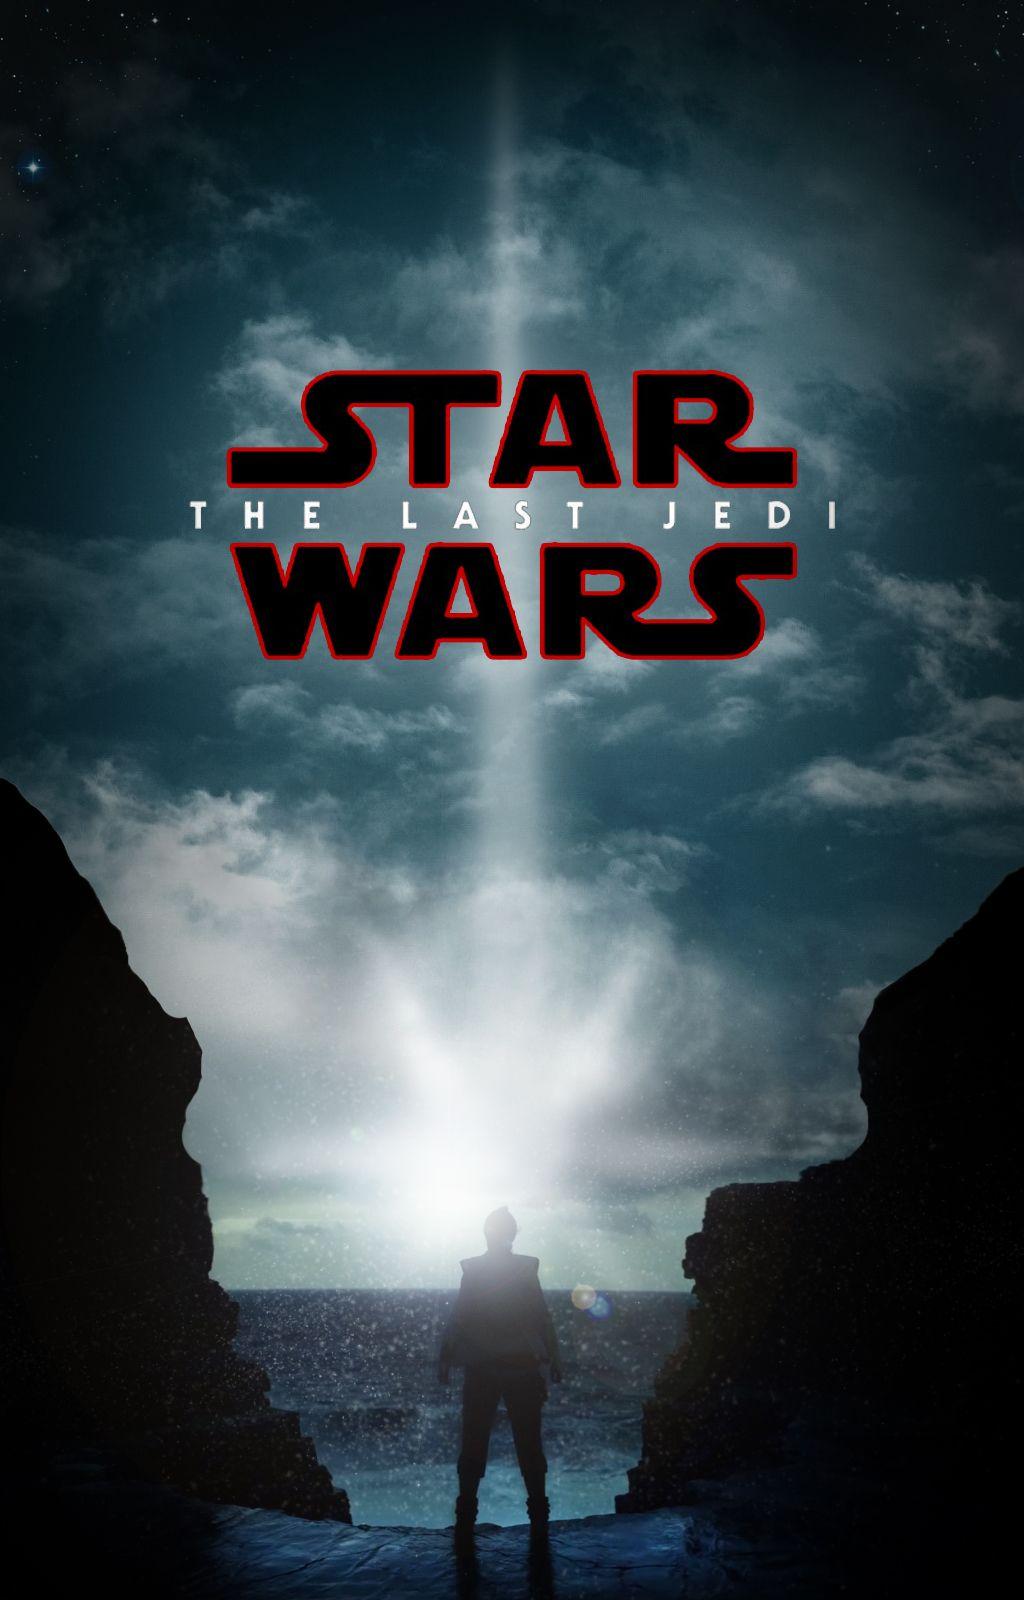 Latest Star Wars The Last Jedi Wallpaper HD Image For PC & Phone